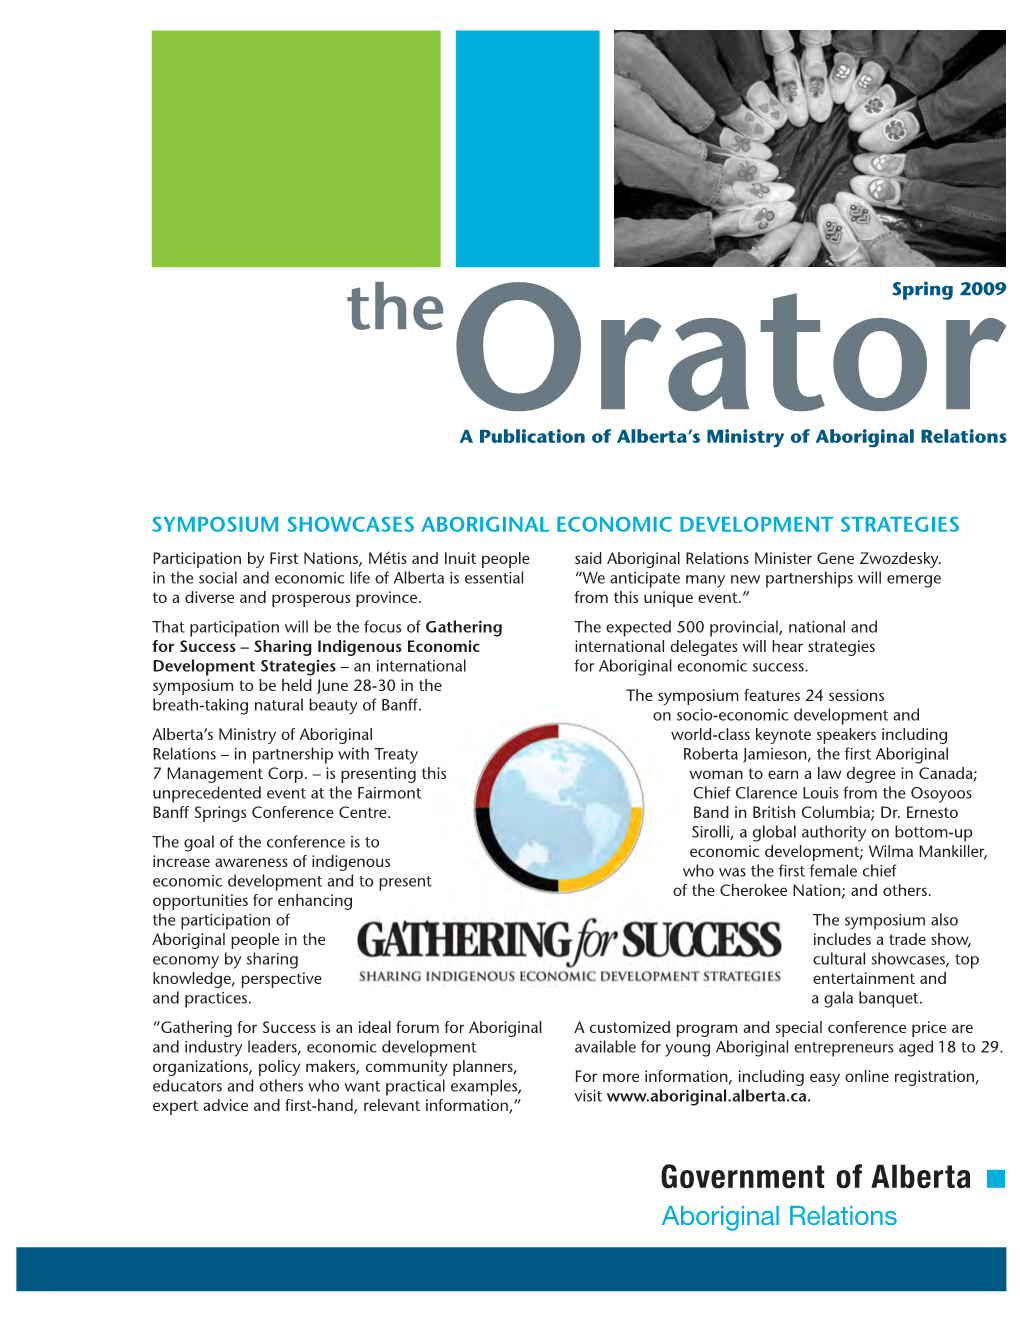 The Orator, Publication of Alberta's Ministry of Aboriginal Relations